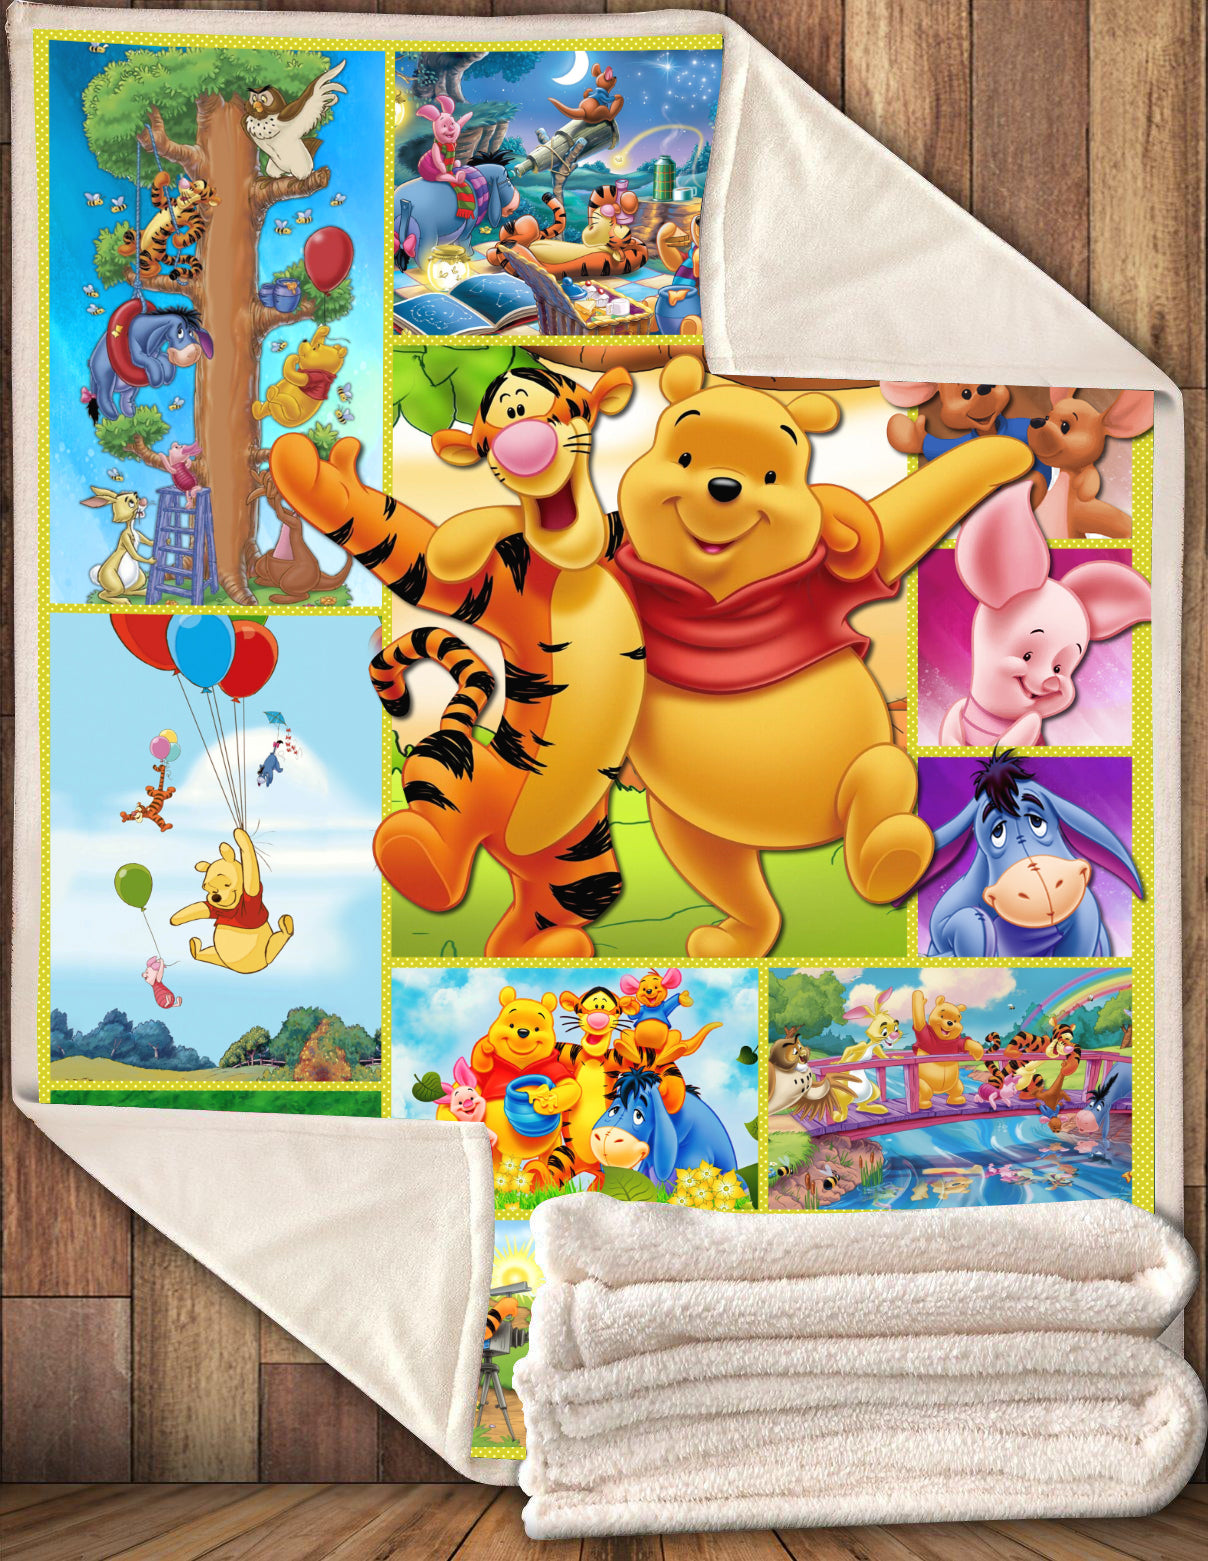 Unifinz DN WTP BLANKET Pooh With Friends Tigger Piglet Eeyore BLANKET Awesome High Quality DN WTP Blanket 2022